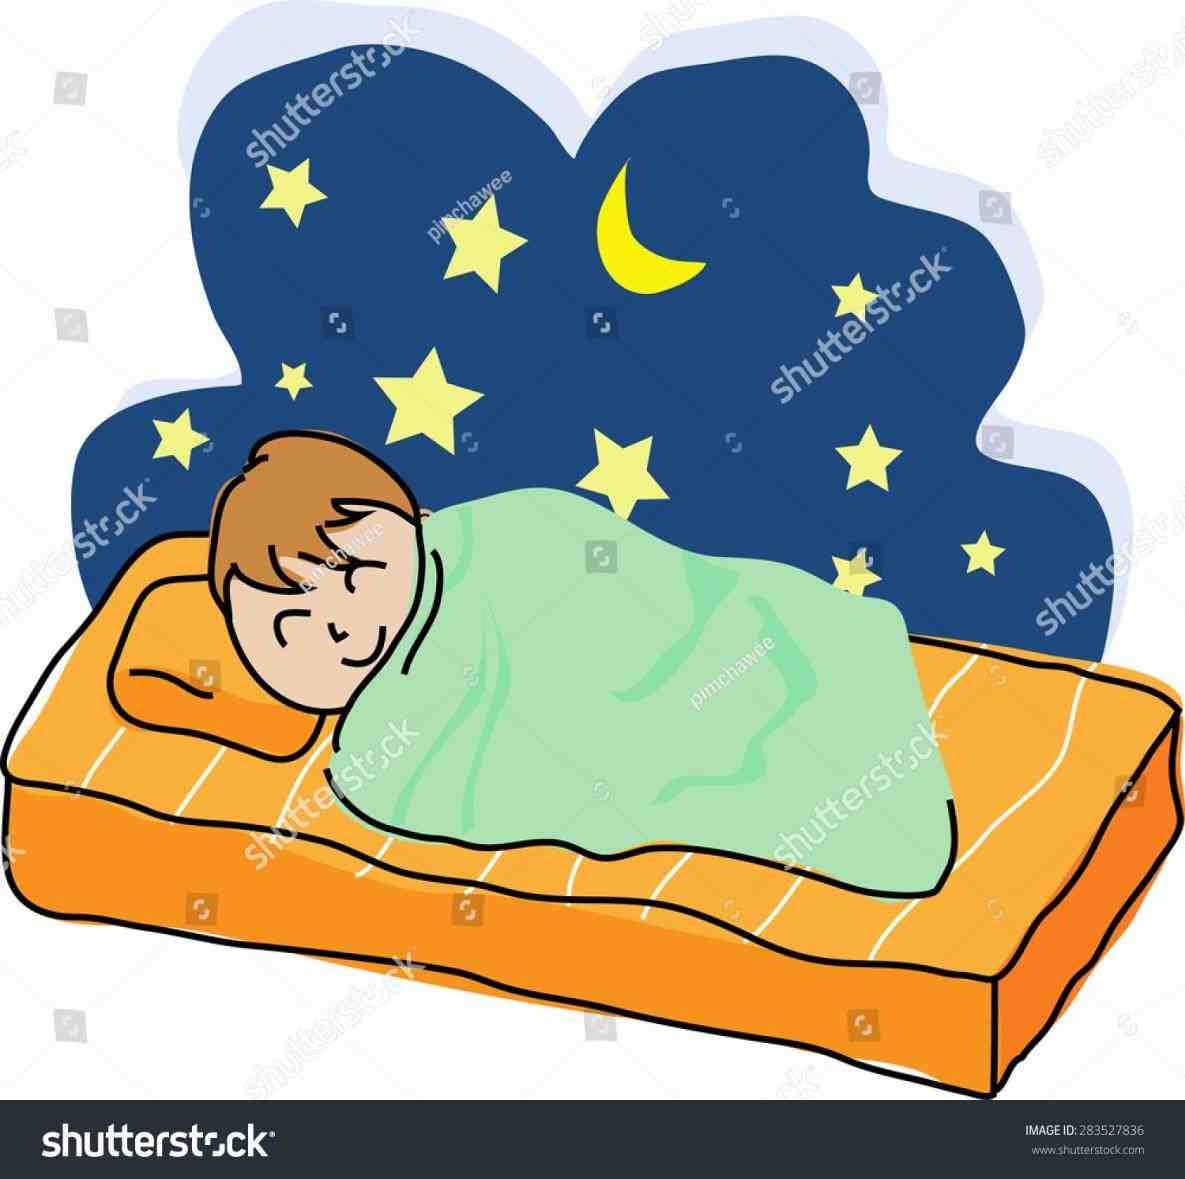 Bedtime clipart pretty bed. Going to clip art